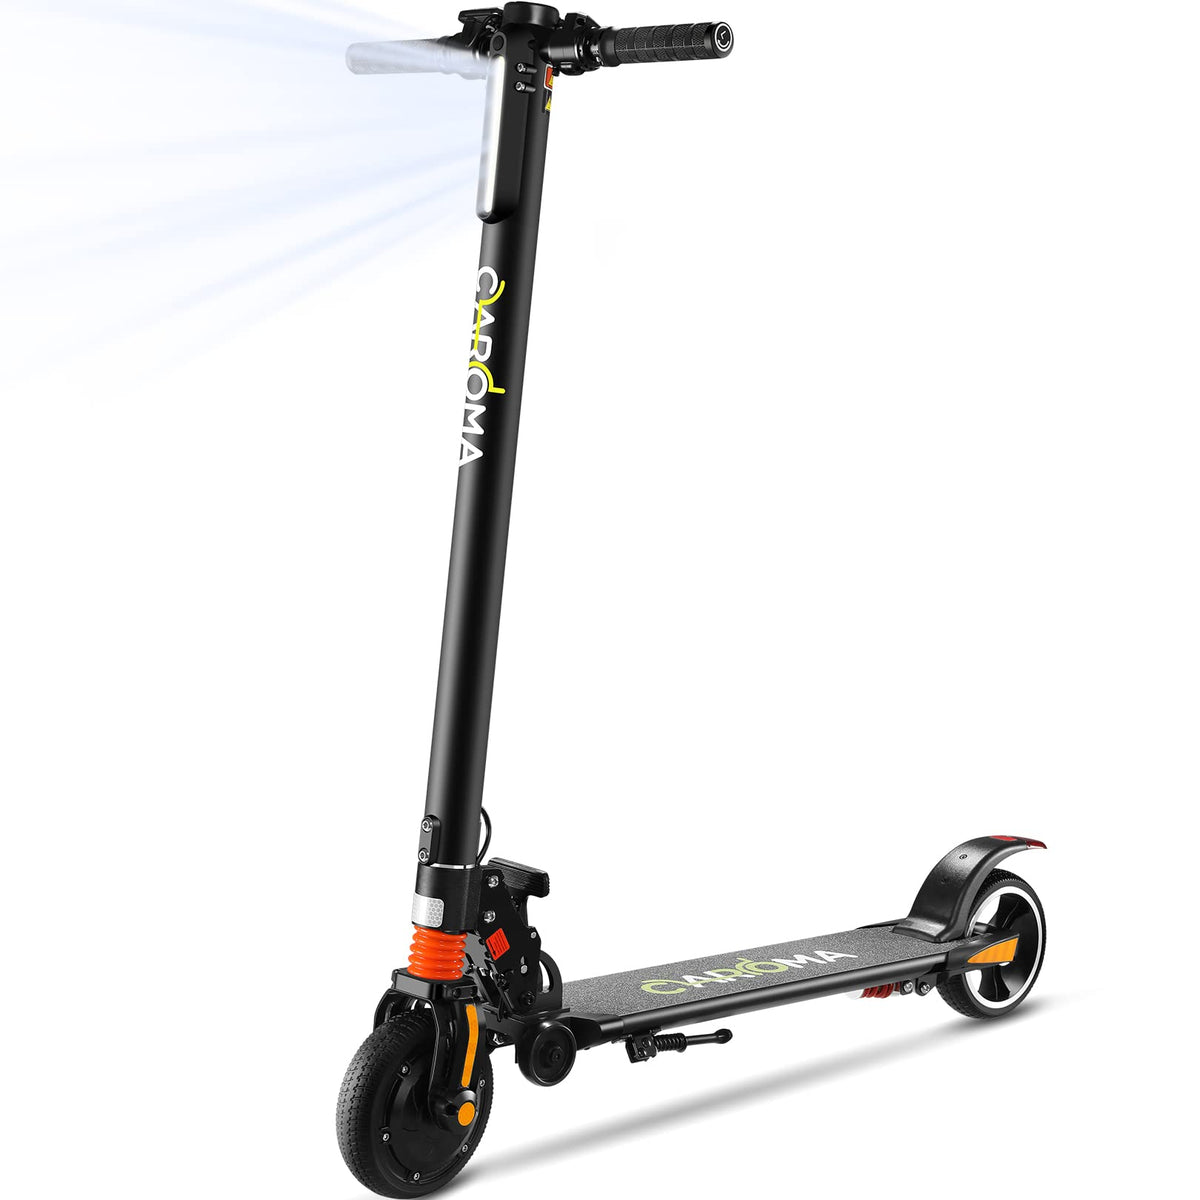 Caroma S12 6.5 Inch 250W Foldable Sports Electric Scooter